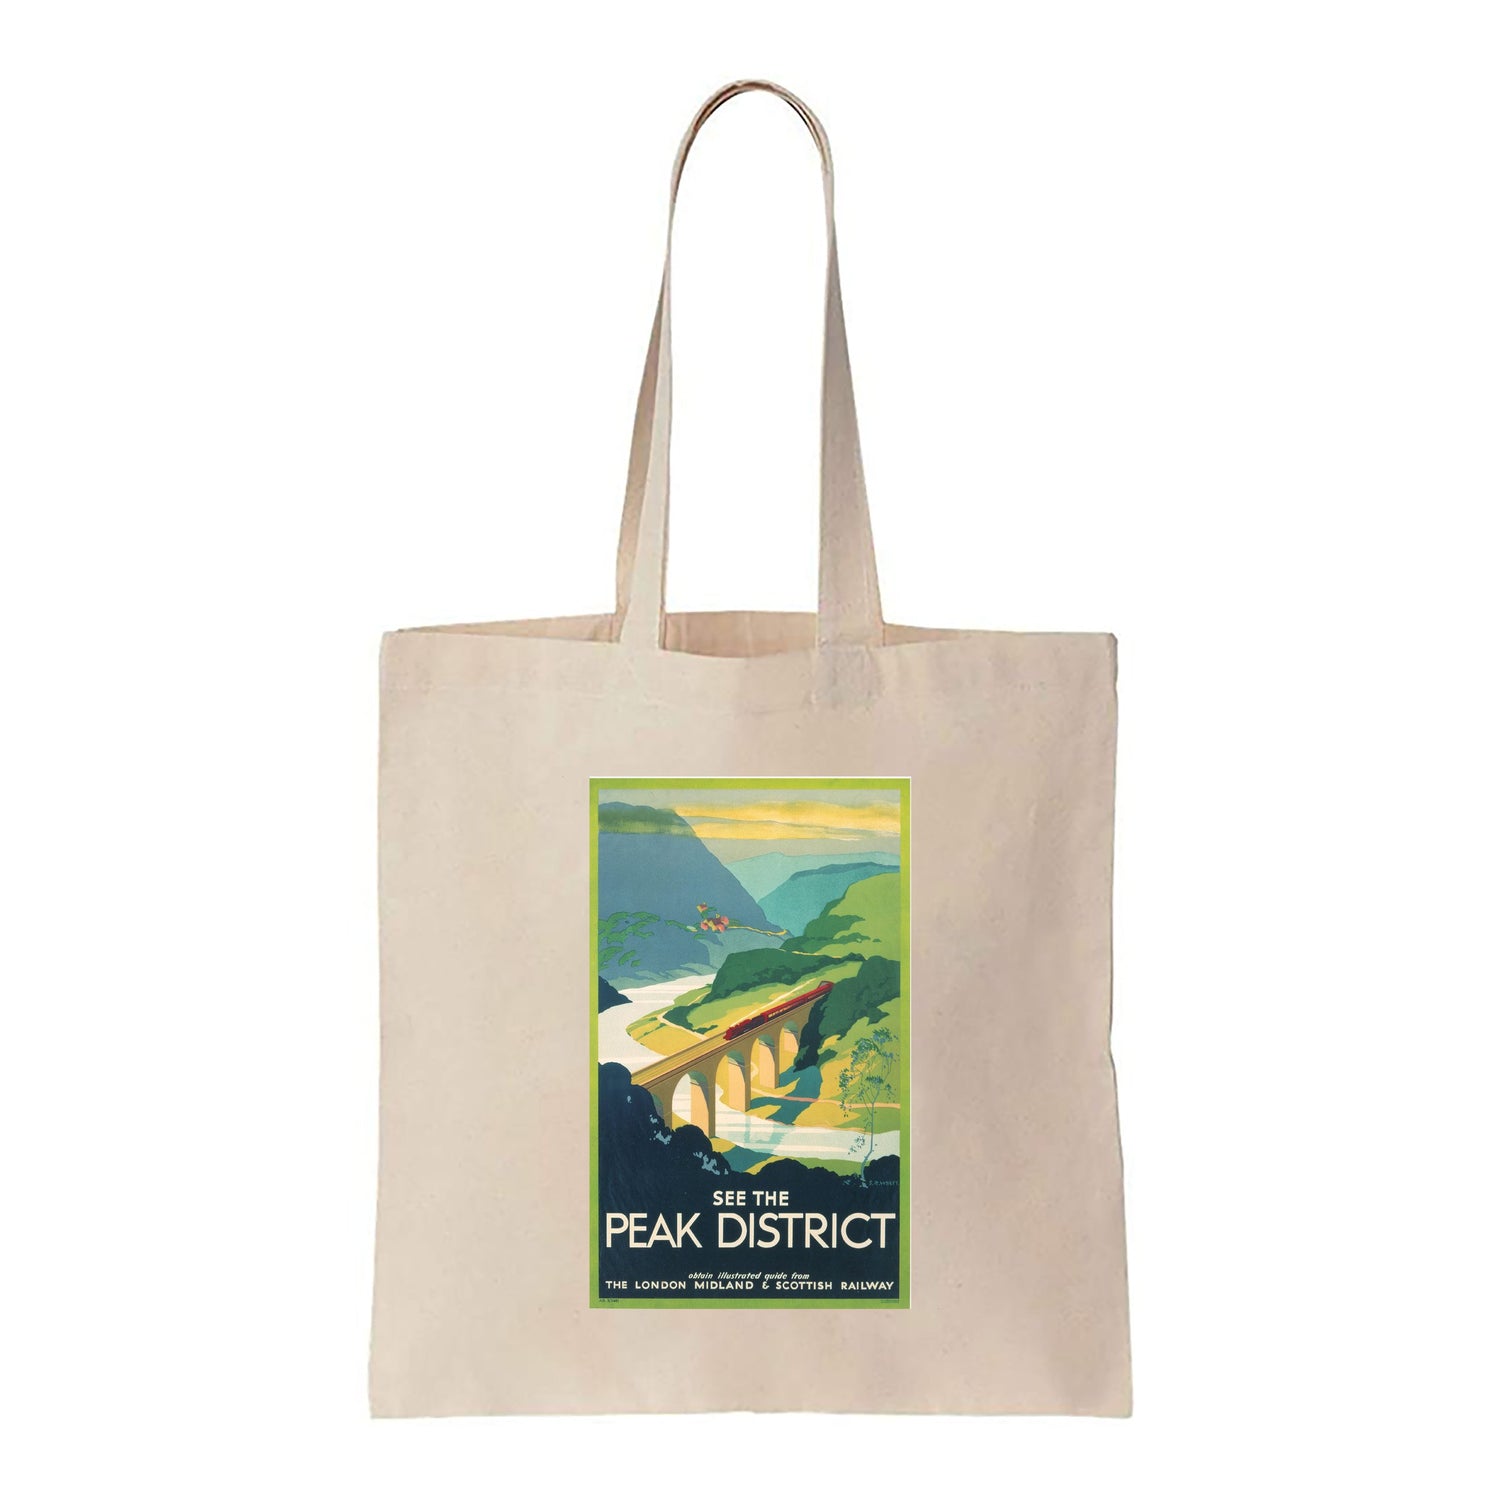 Derbyshire Dales - See the Peak District - Canvas Tote Bag